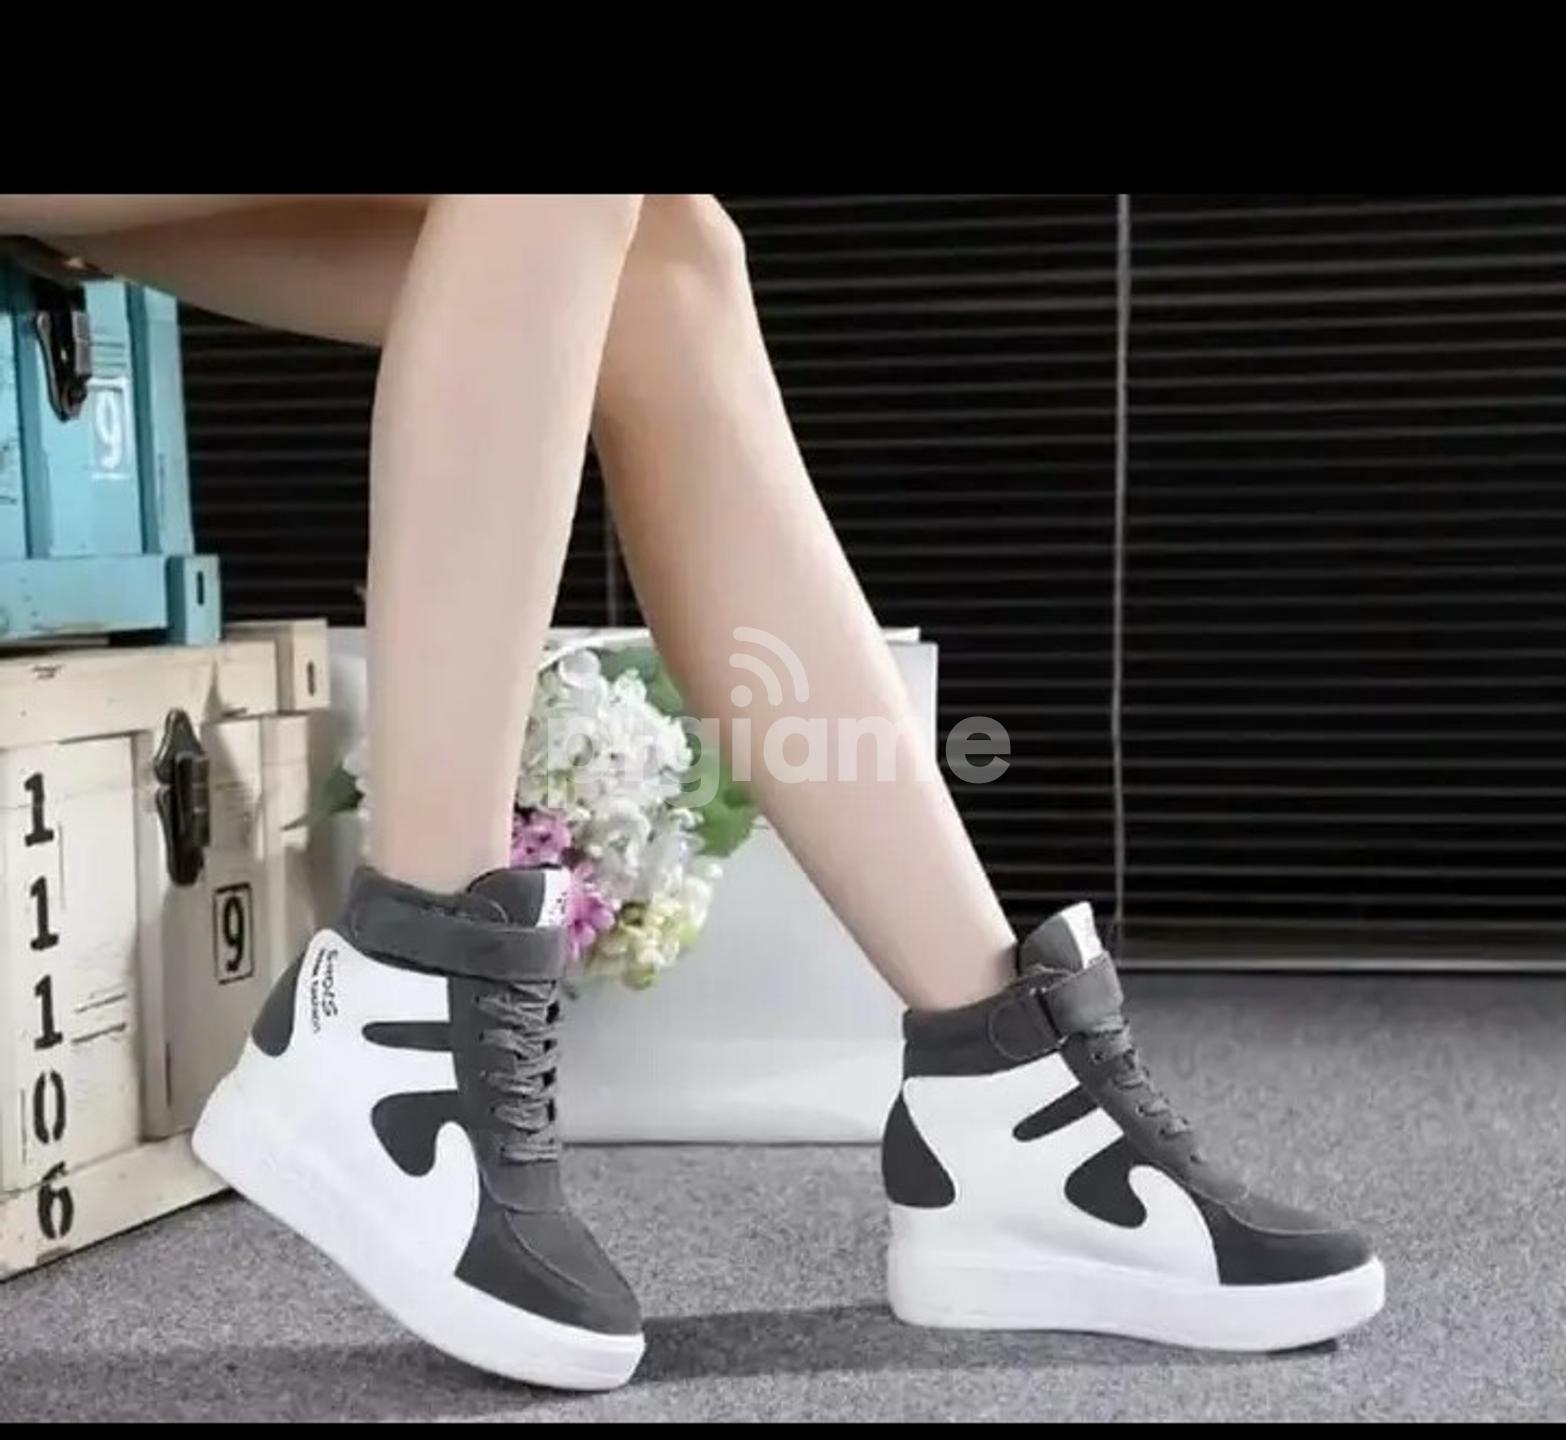 Tenmix Women Wedge Sneakers Trainers Sneakers Ankle Comfy Lace Up Sneakers  Sports Shoes Khaki 1 Pair US 8.5 - Walmart.com